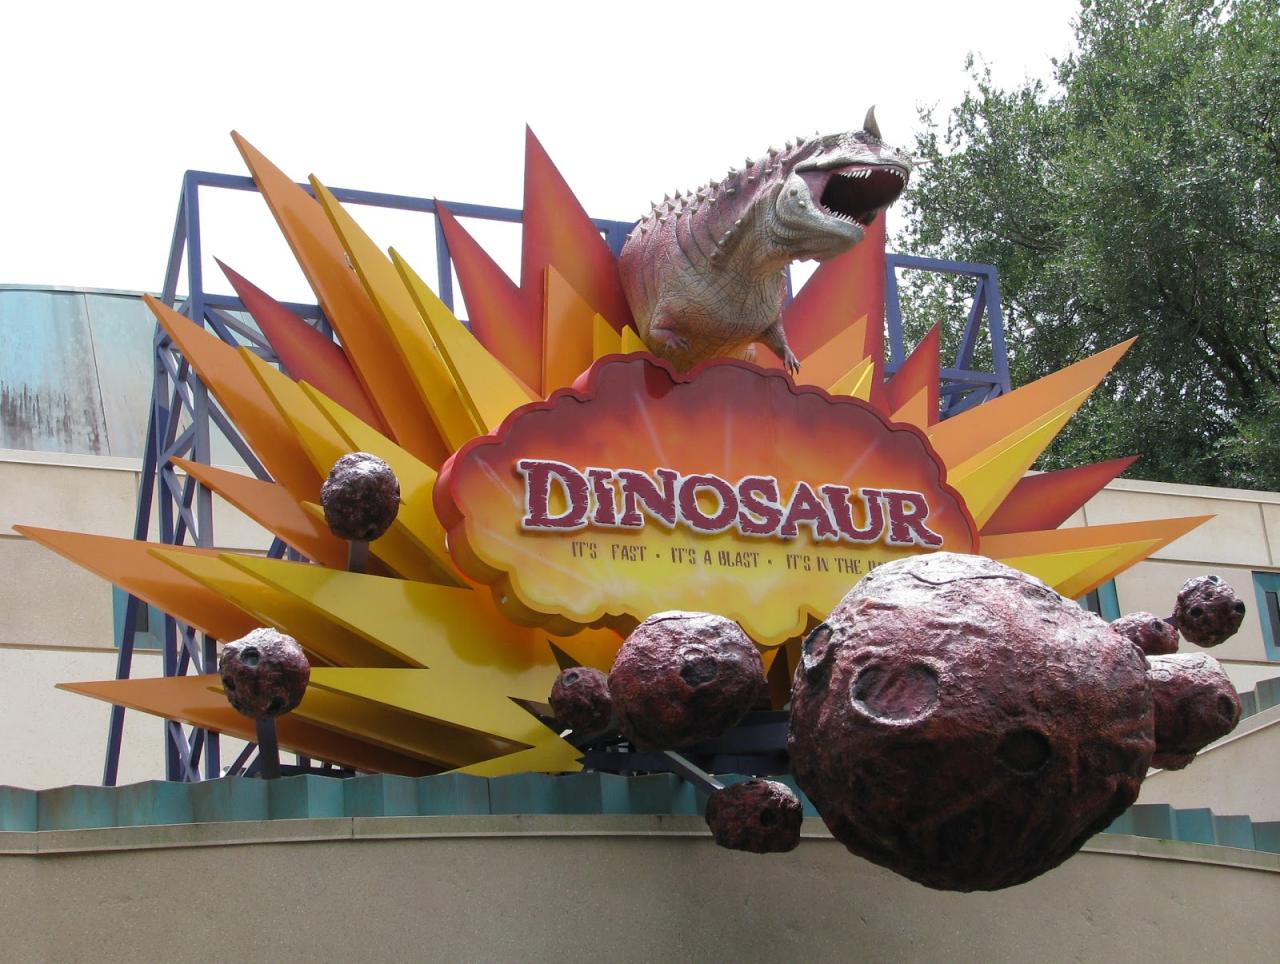 Disney's Animal Kingdom DINOSAUR Attraction Has A Code For You To Solve | Disney World Blog